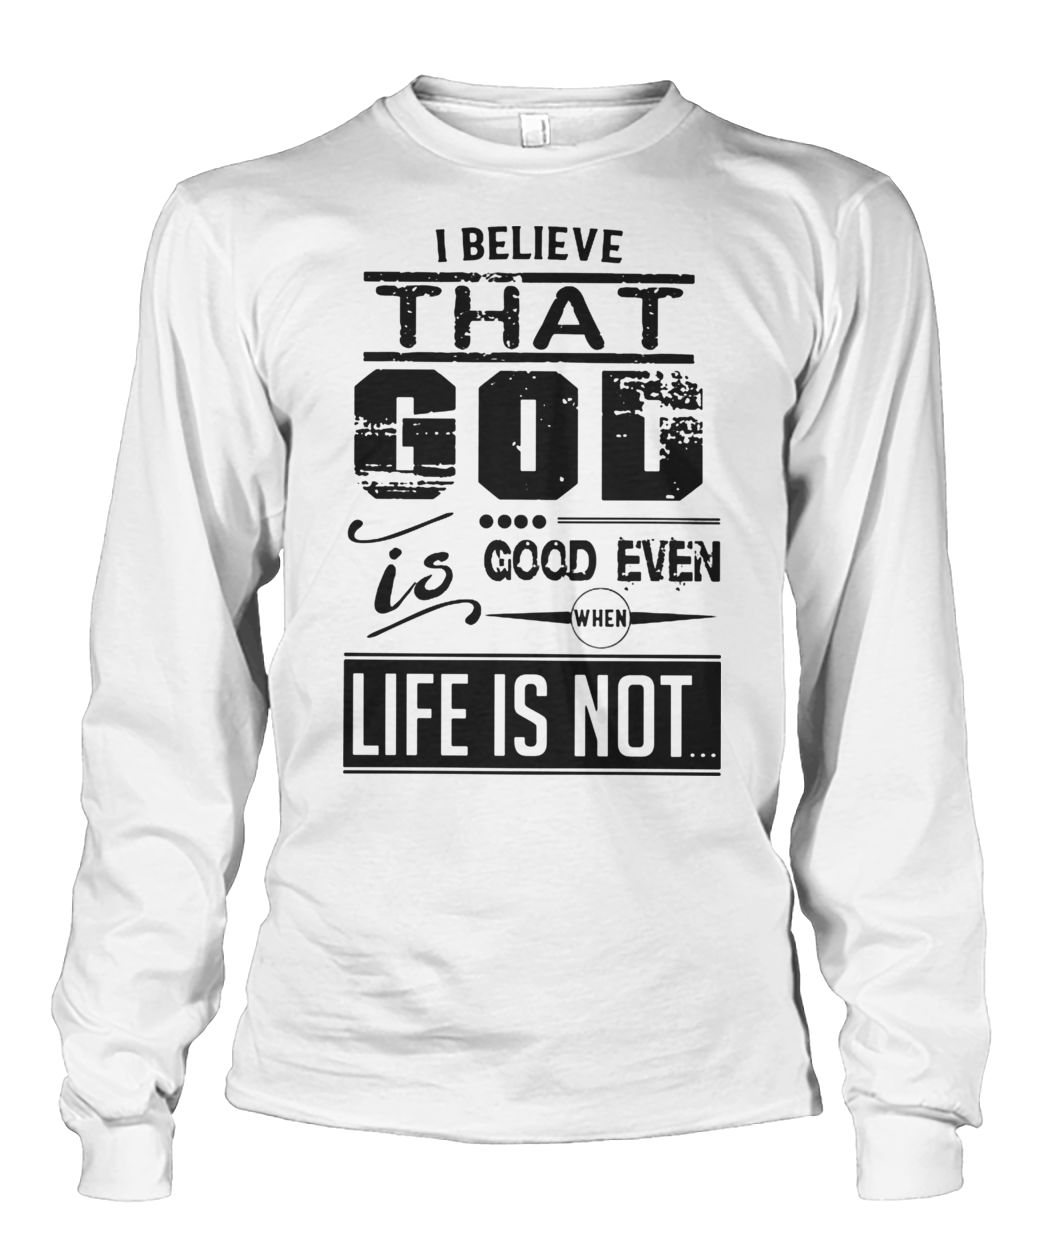 I believe that God is good even when life is not unisex long sleeve